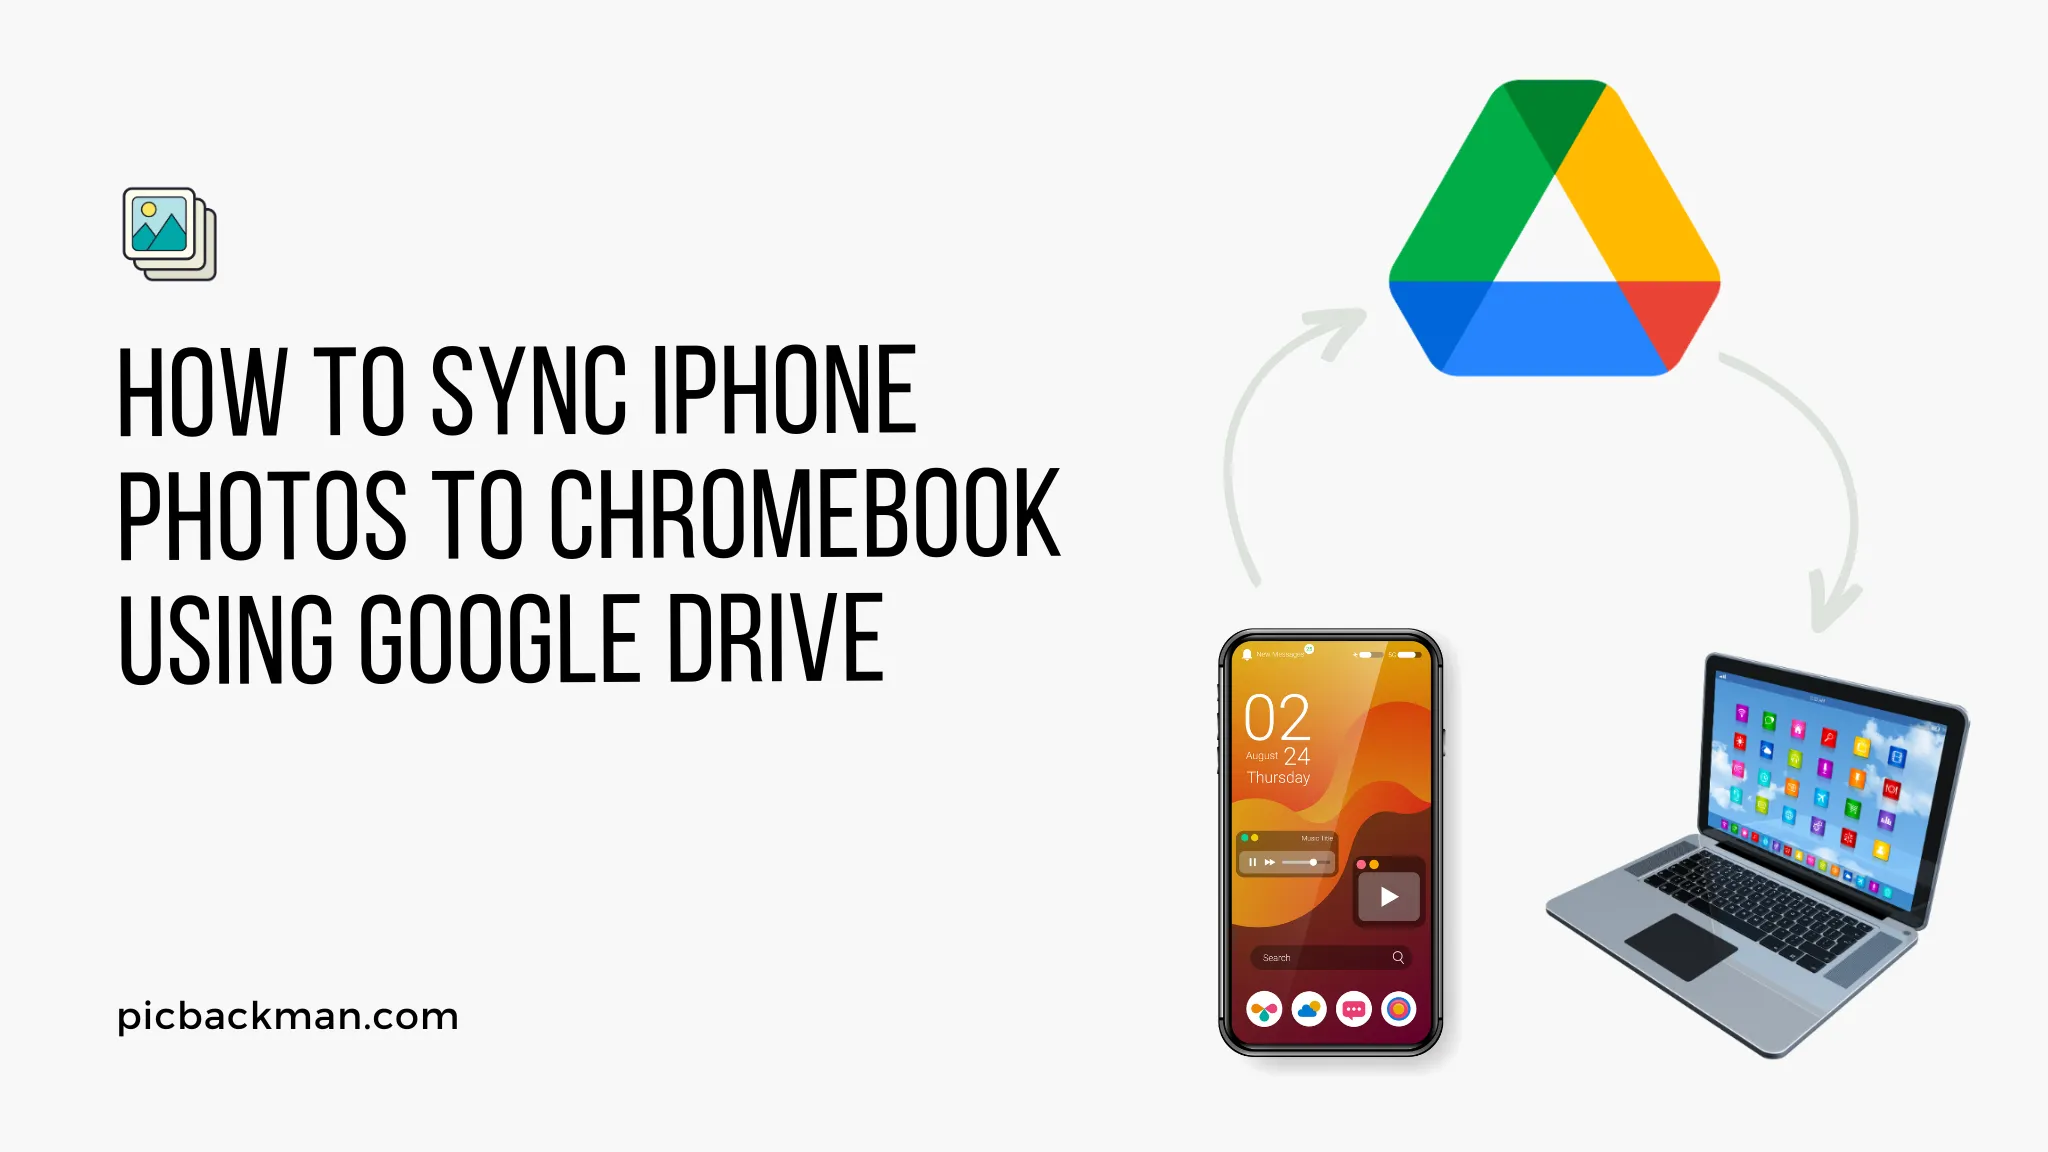 How to Sync iPhone Photos to Chromebook using Google Drive?